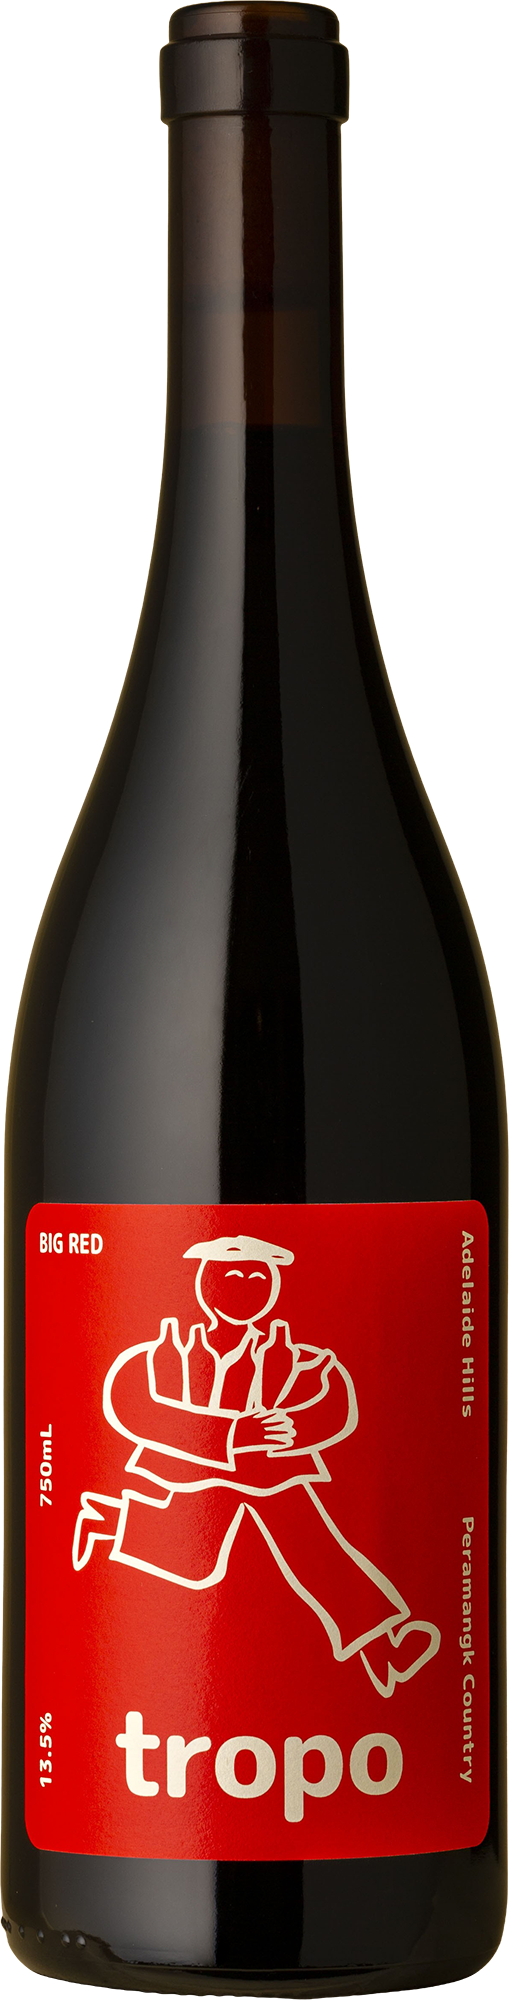 Tropo - Big Red Red Blend 2021 Red Wine